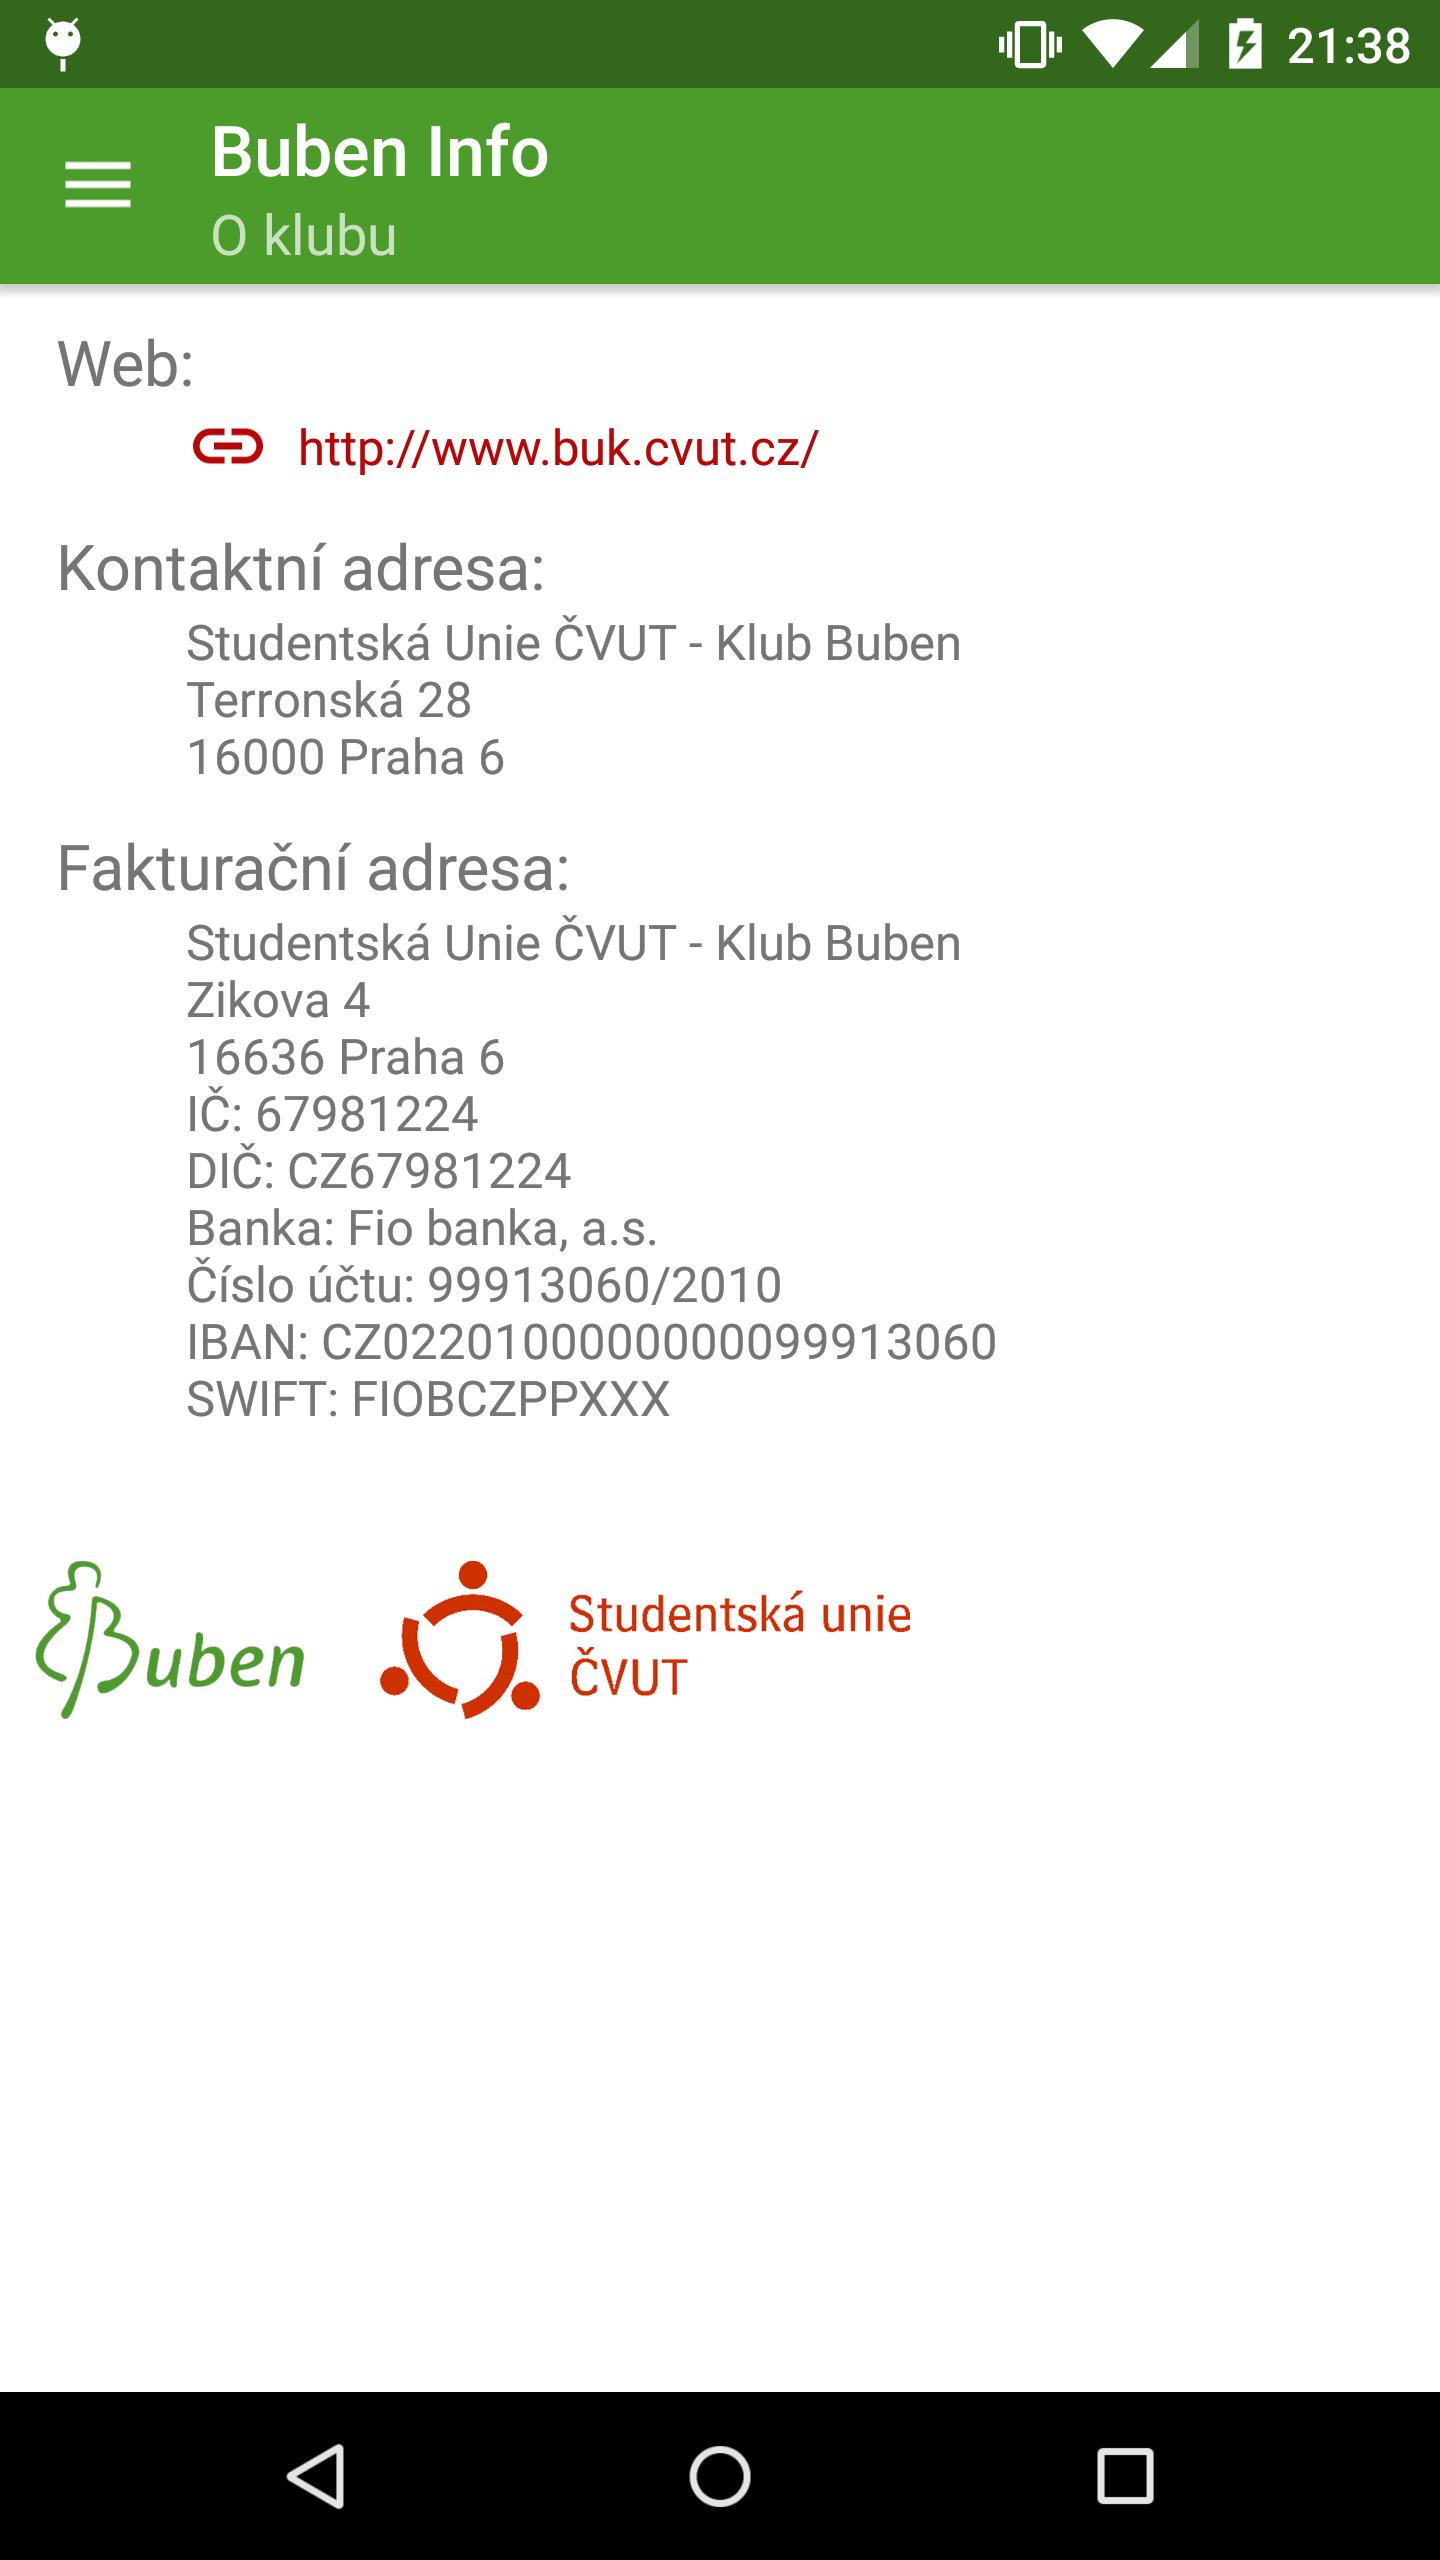 Buben Info for Android - APK Download